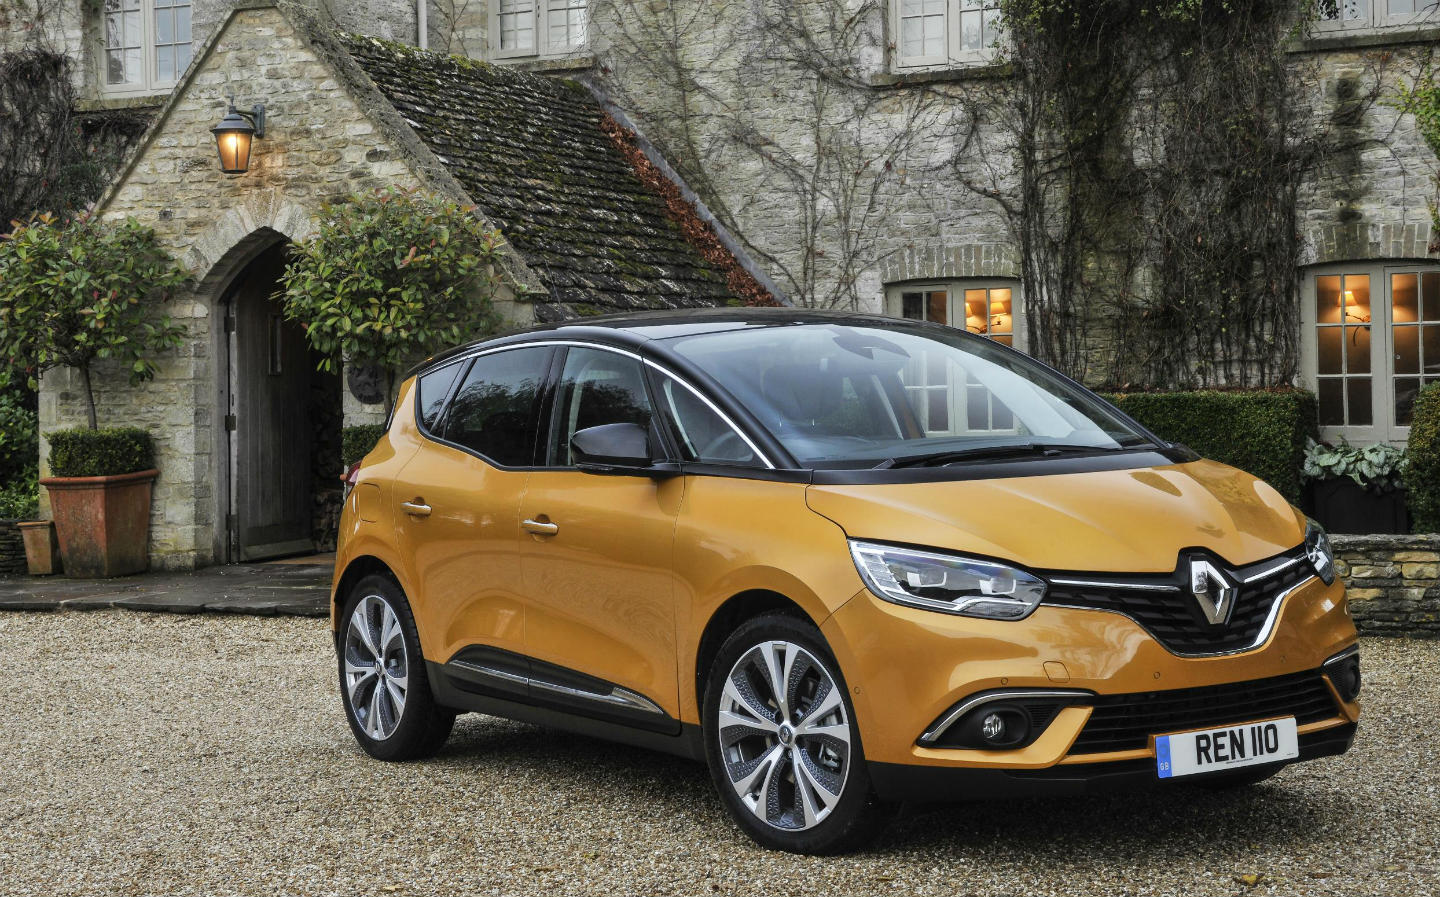 The best eco-friendly hybrid large cars: Renault Scenic Hybrid Assist 2018